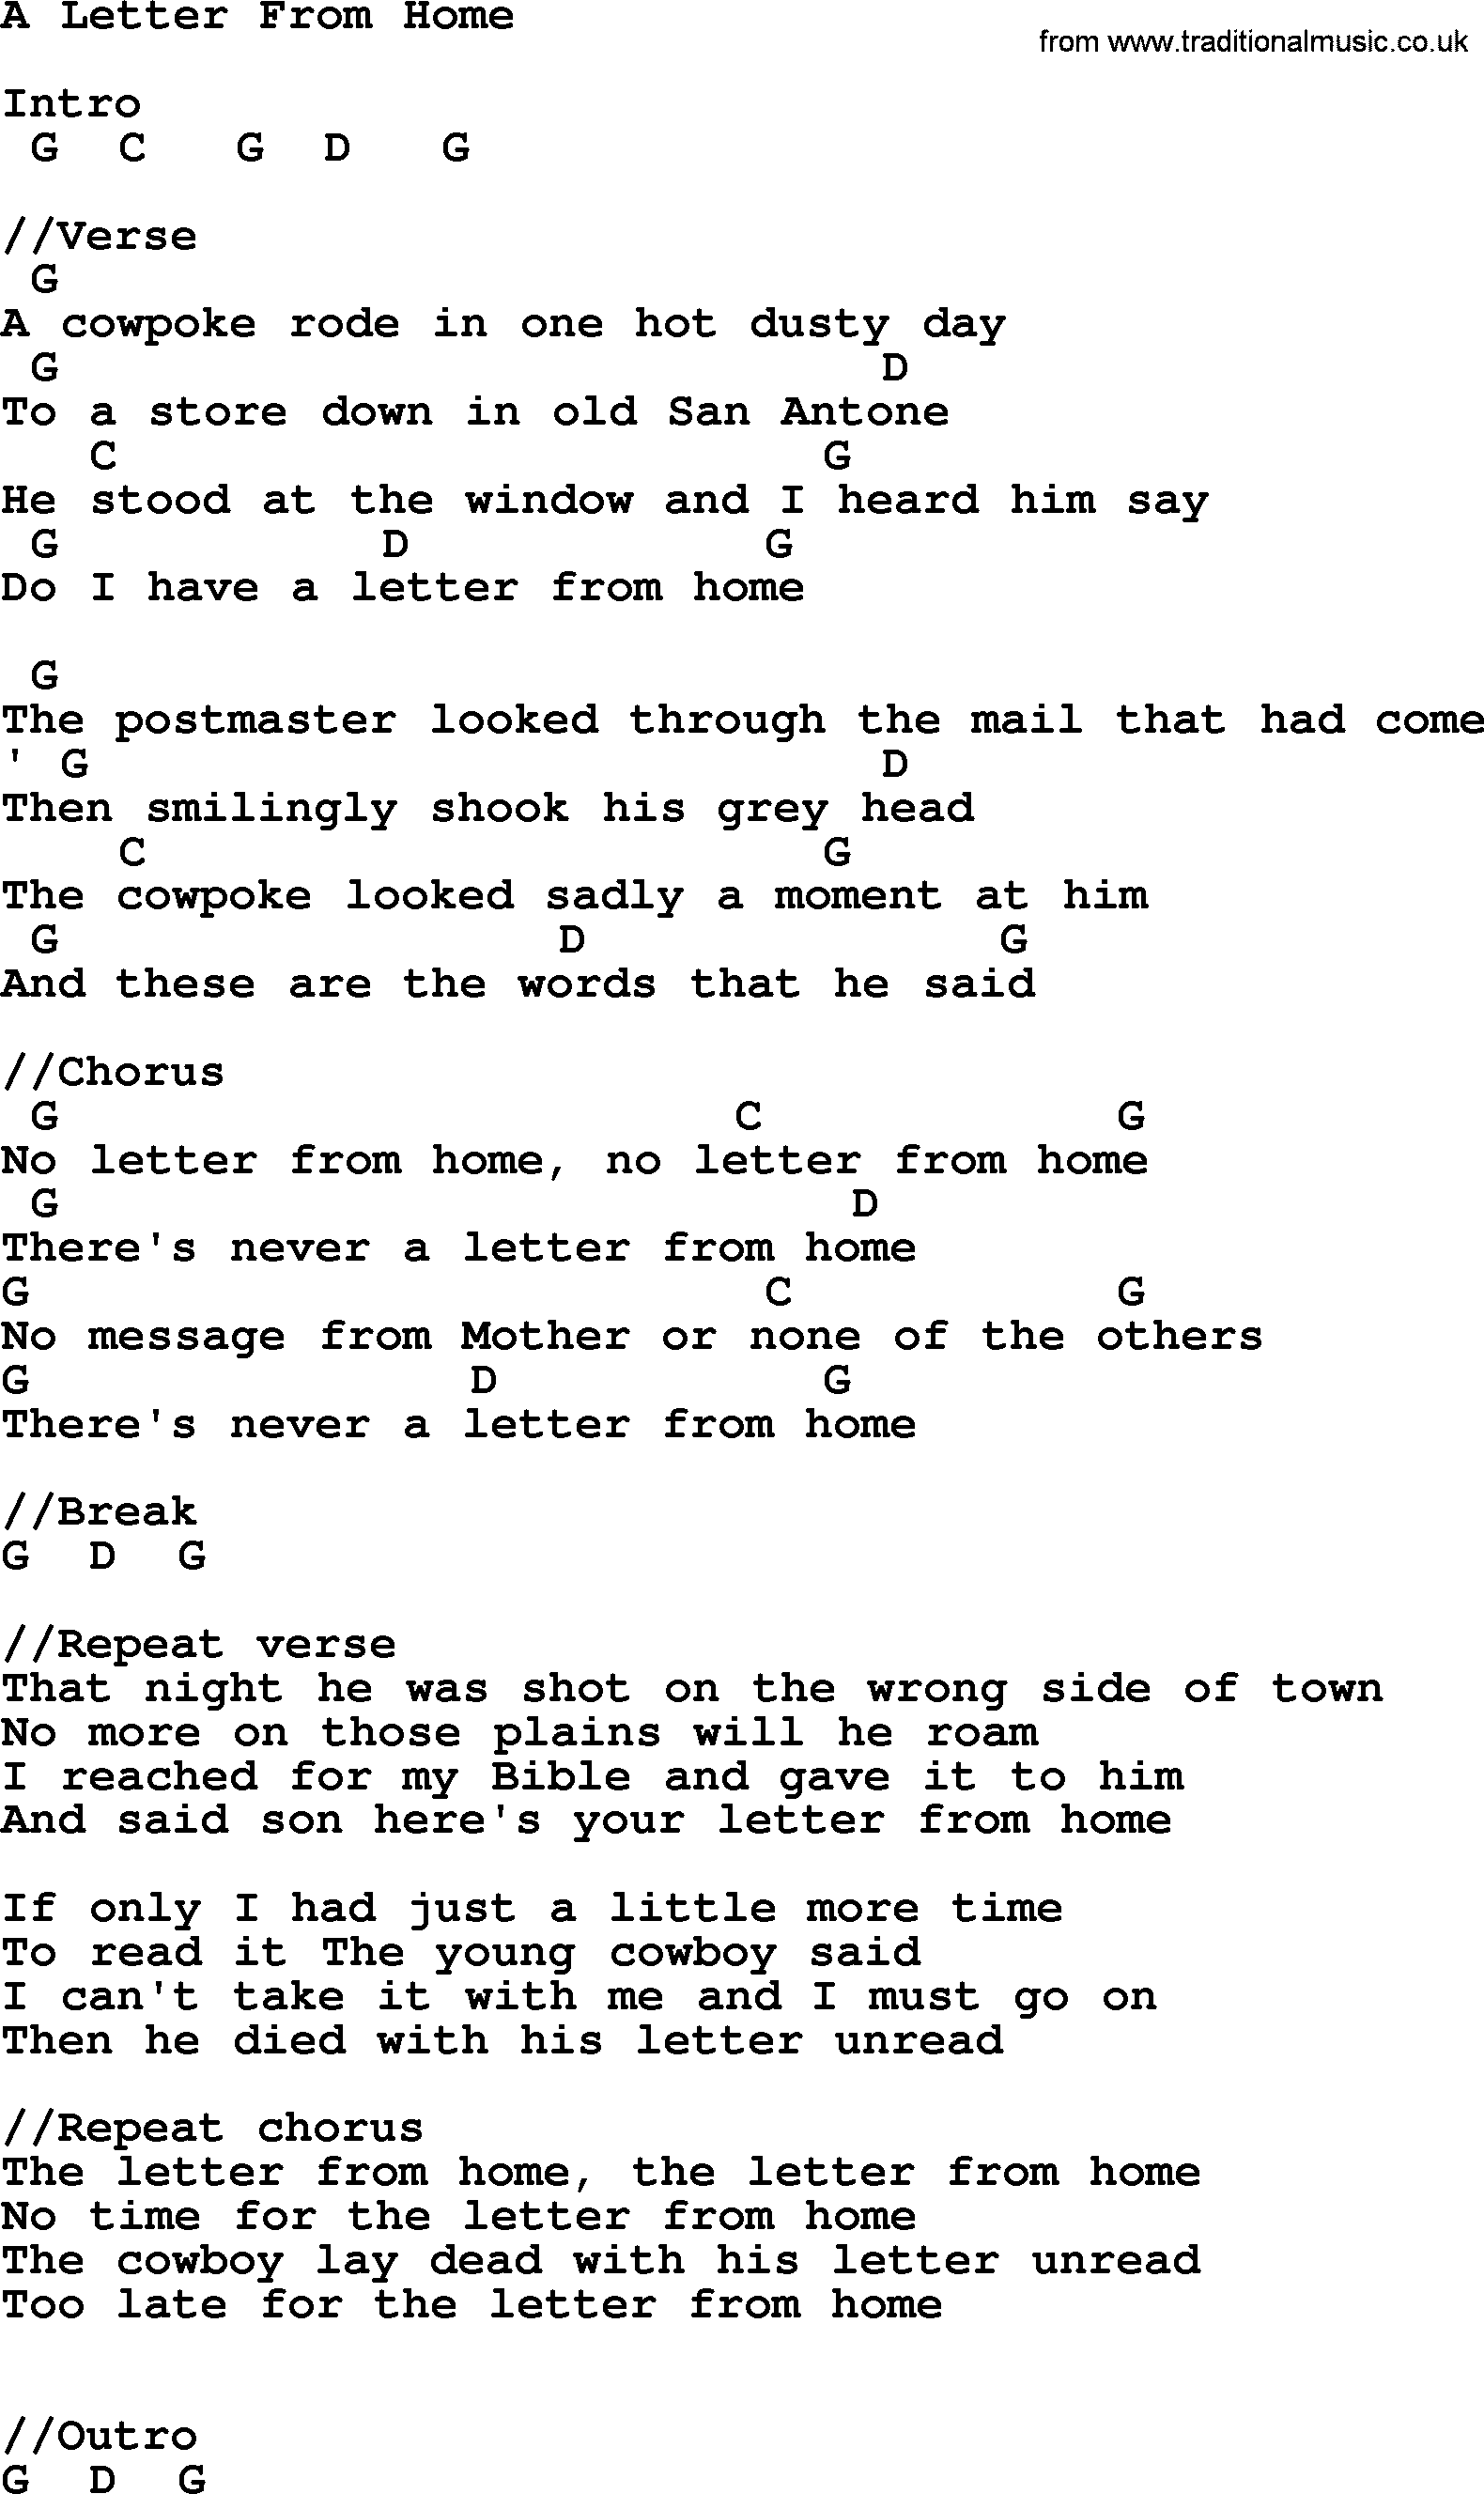 Johnny Cash song A Letter From Home, lyrics and chords